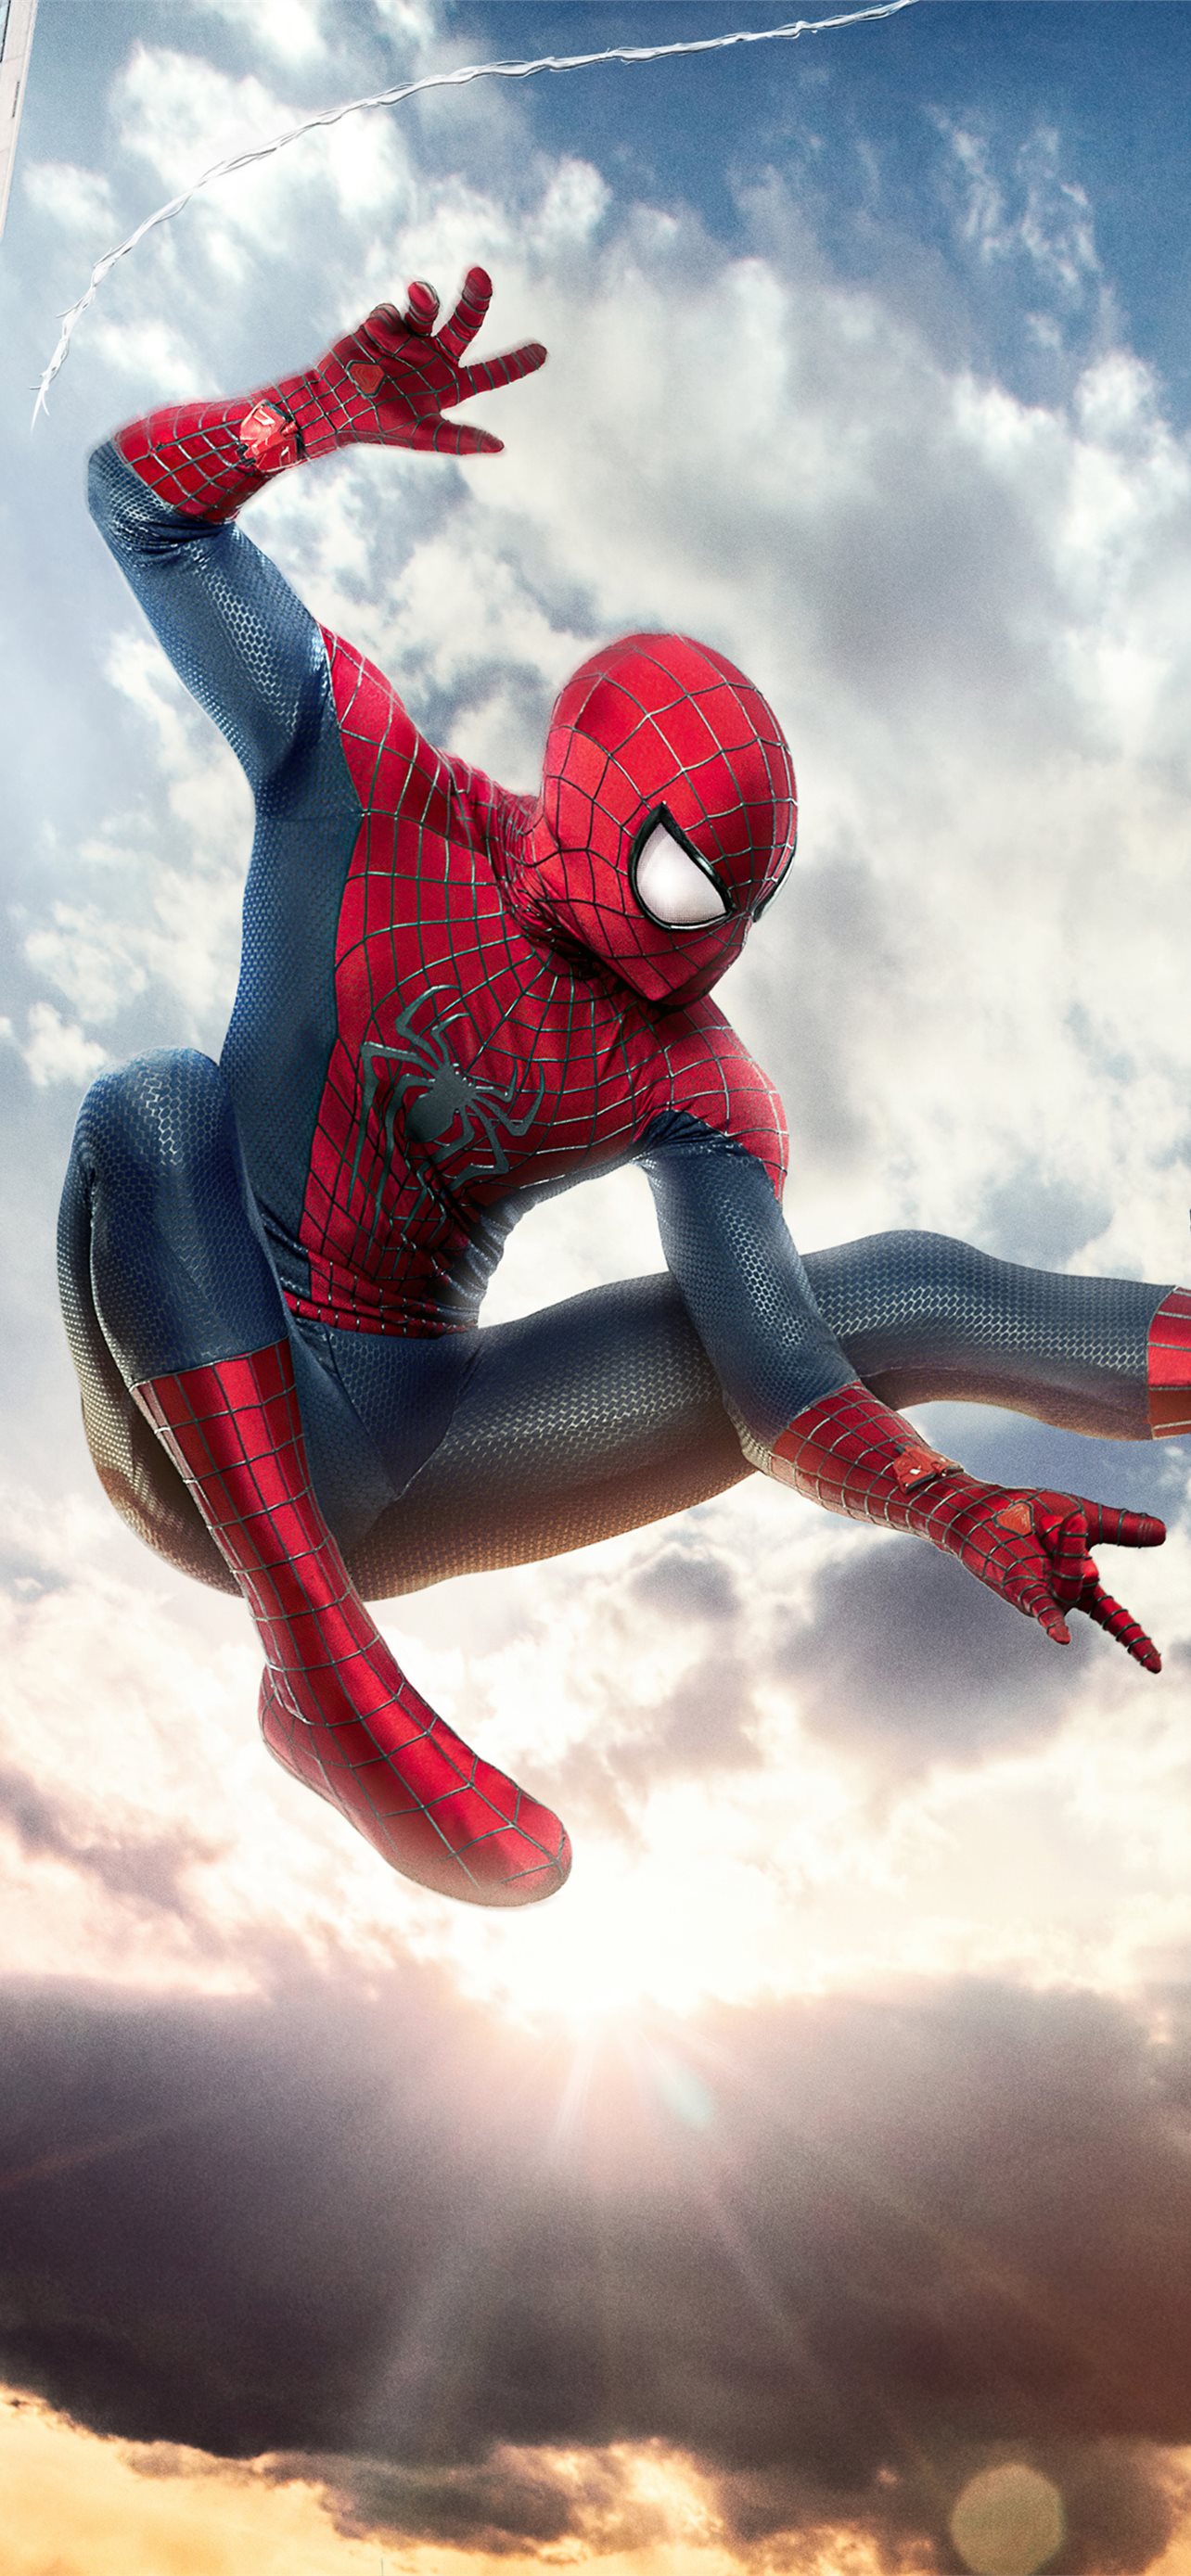 Download Marvels Spider Man 2 wallpapers for mobile phone free  Marvels Spider Man 2 HD pictures